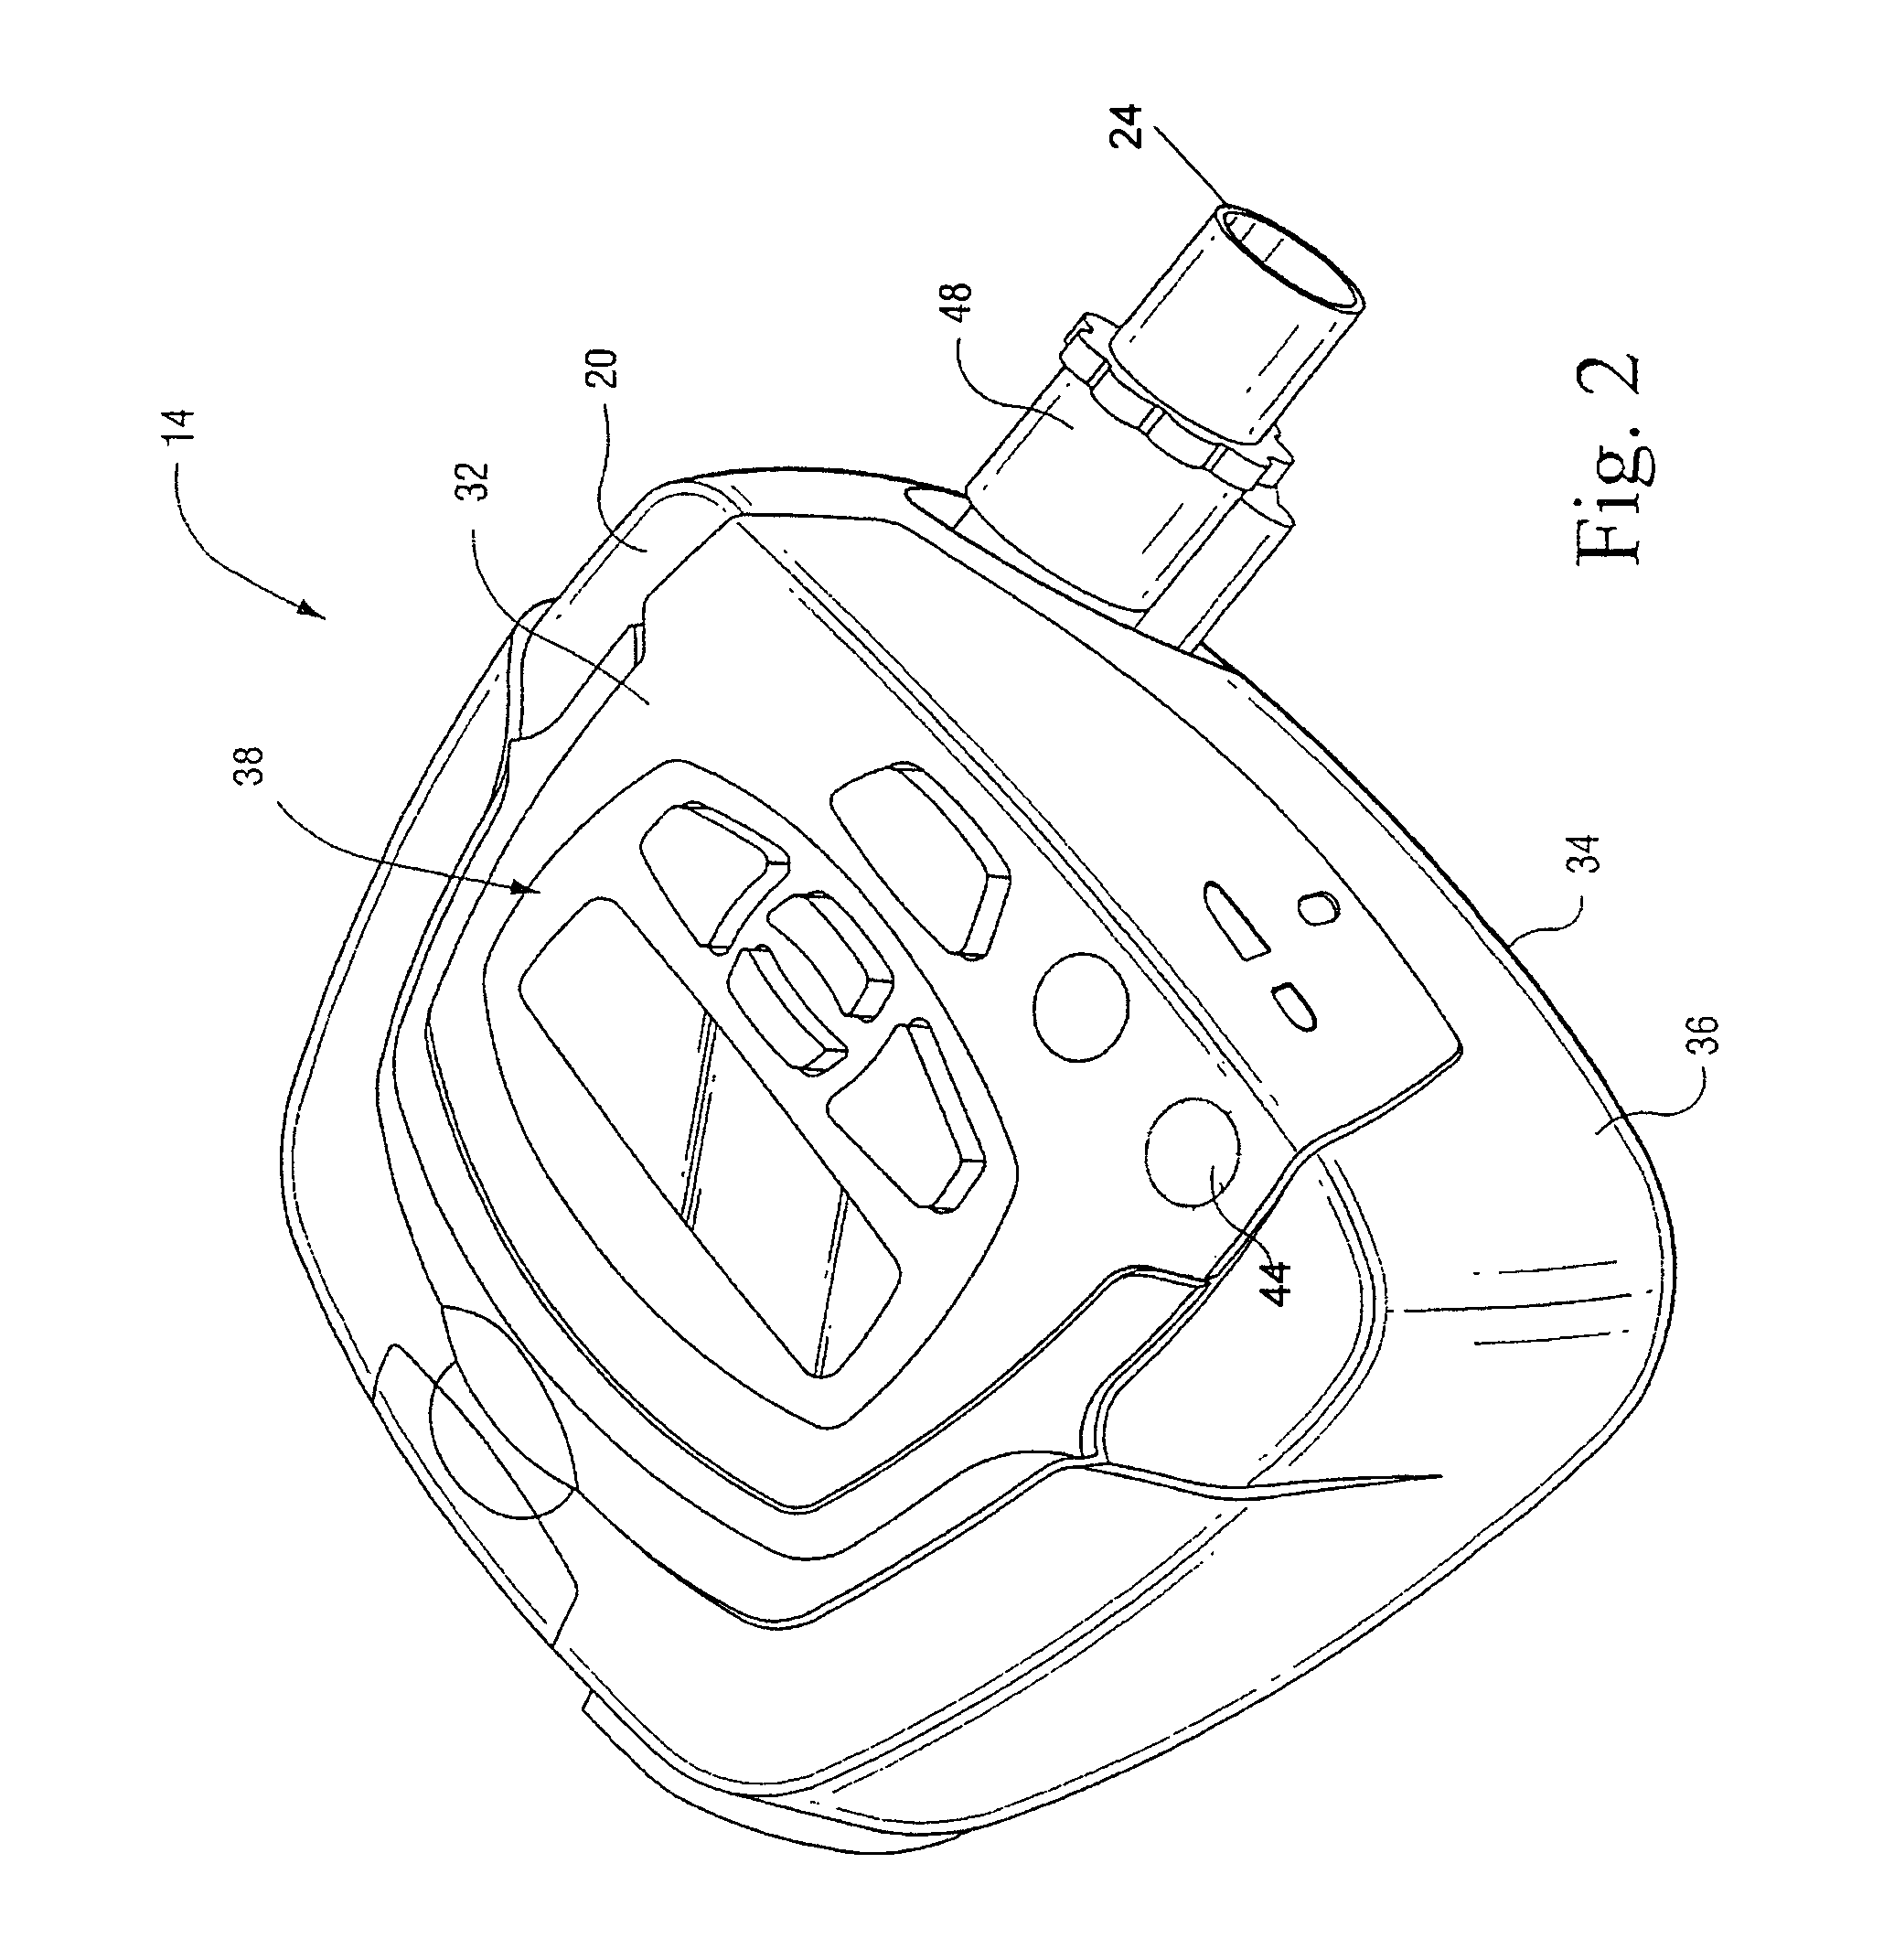 Identification system and method for mask and ventilator components